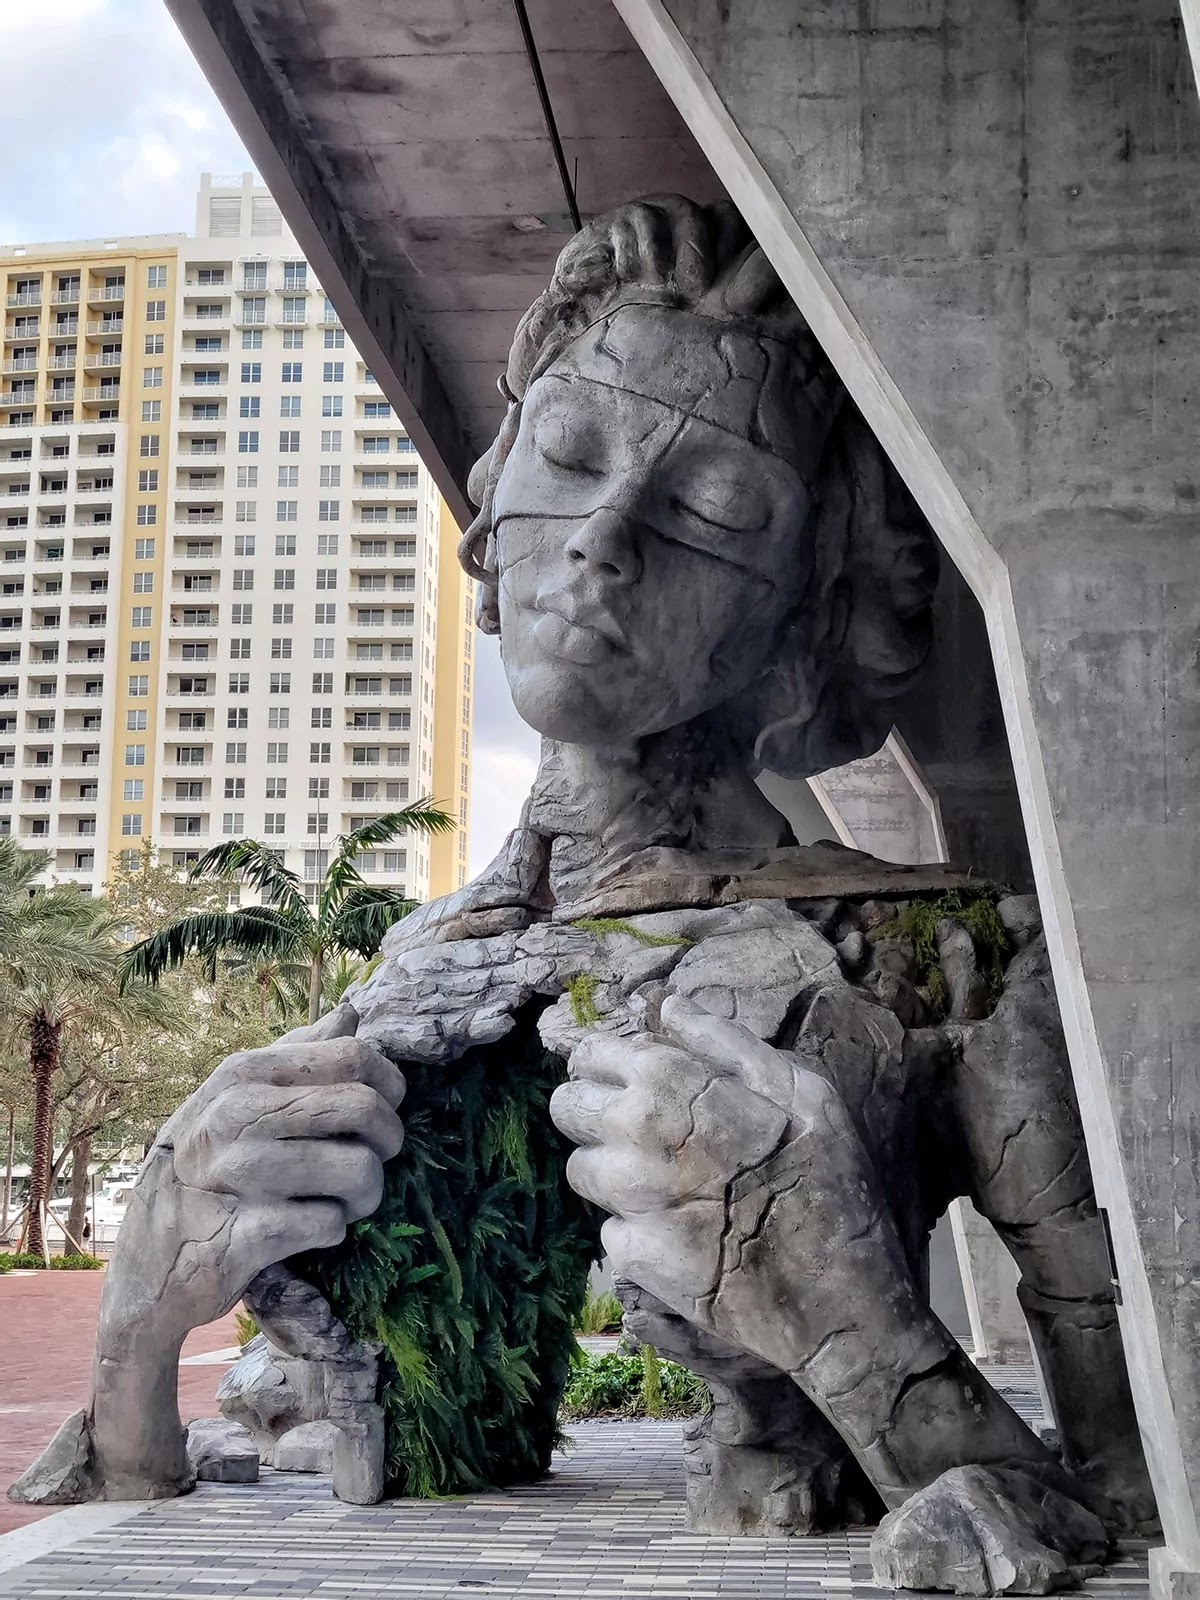 Amazing Giant Sculpture In Fort Lauderdale Stands As A Symbol Of Hope After The Year Of 2020